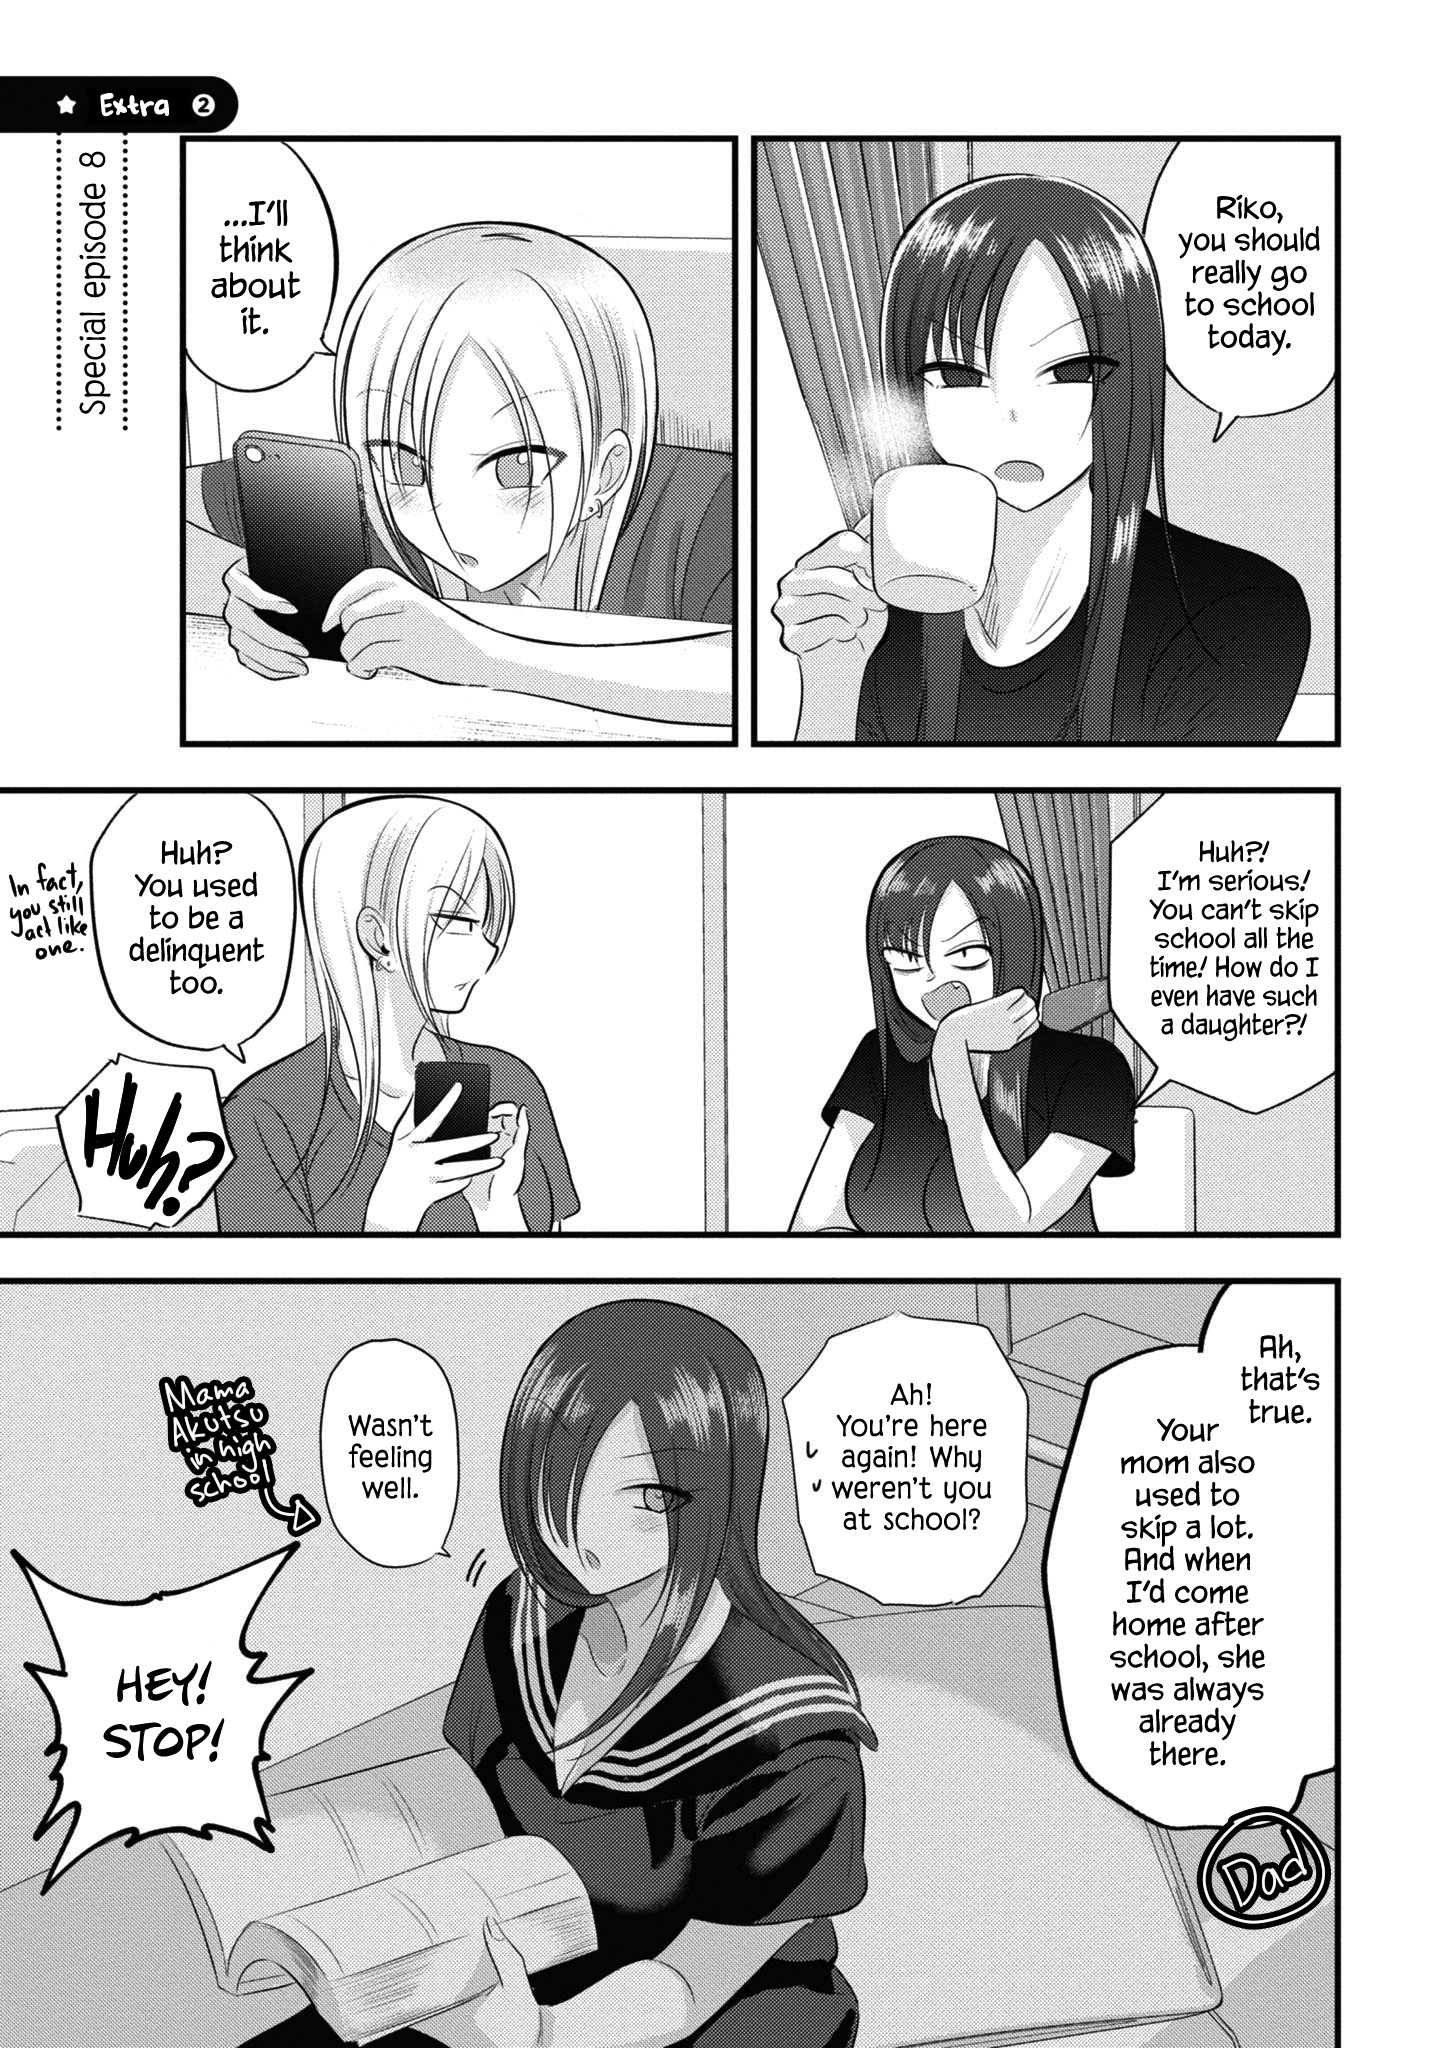 Please Go Home, Akutsu-San! Vol.5 Chapter 105.2: Volume 5 Extra 2 - Picture 1